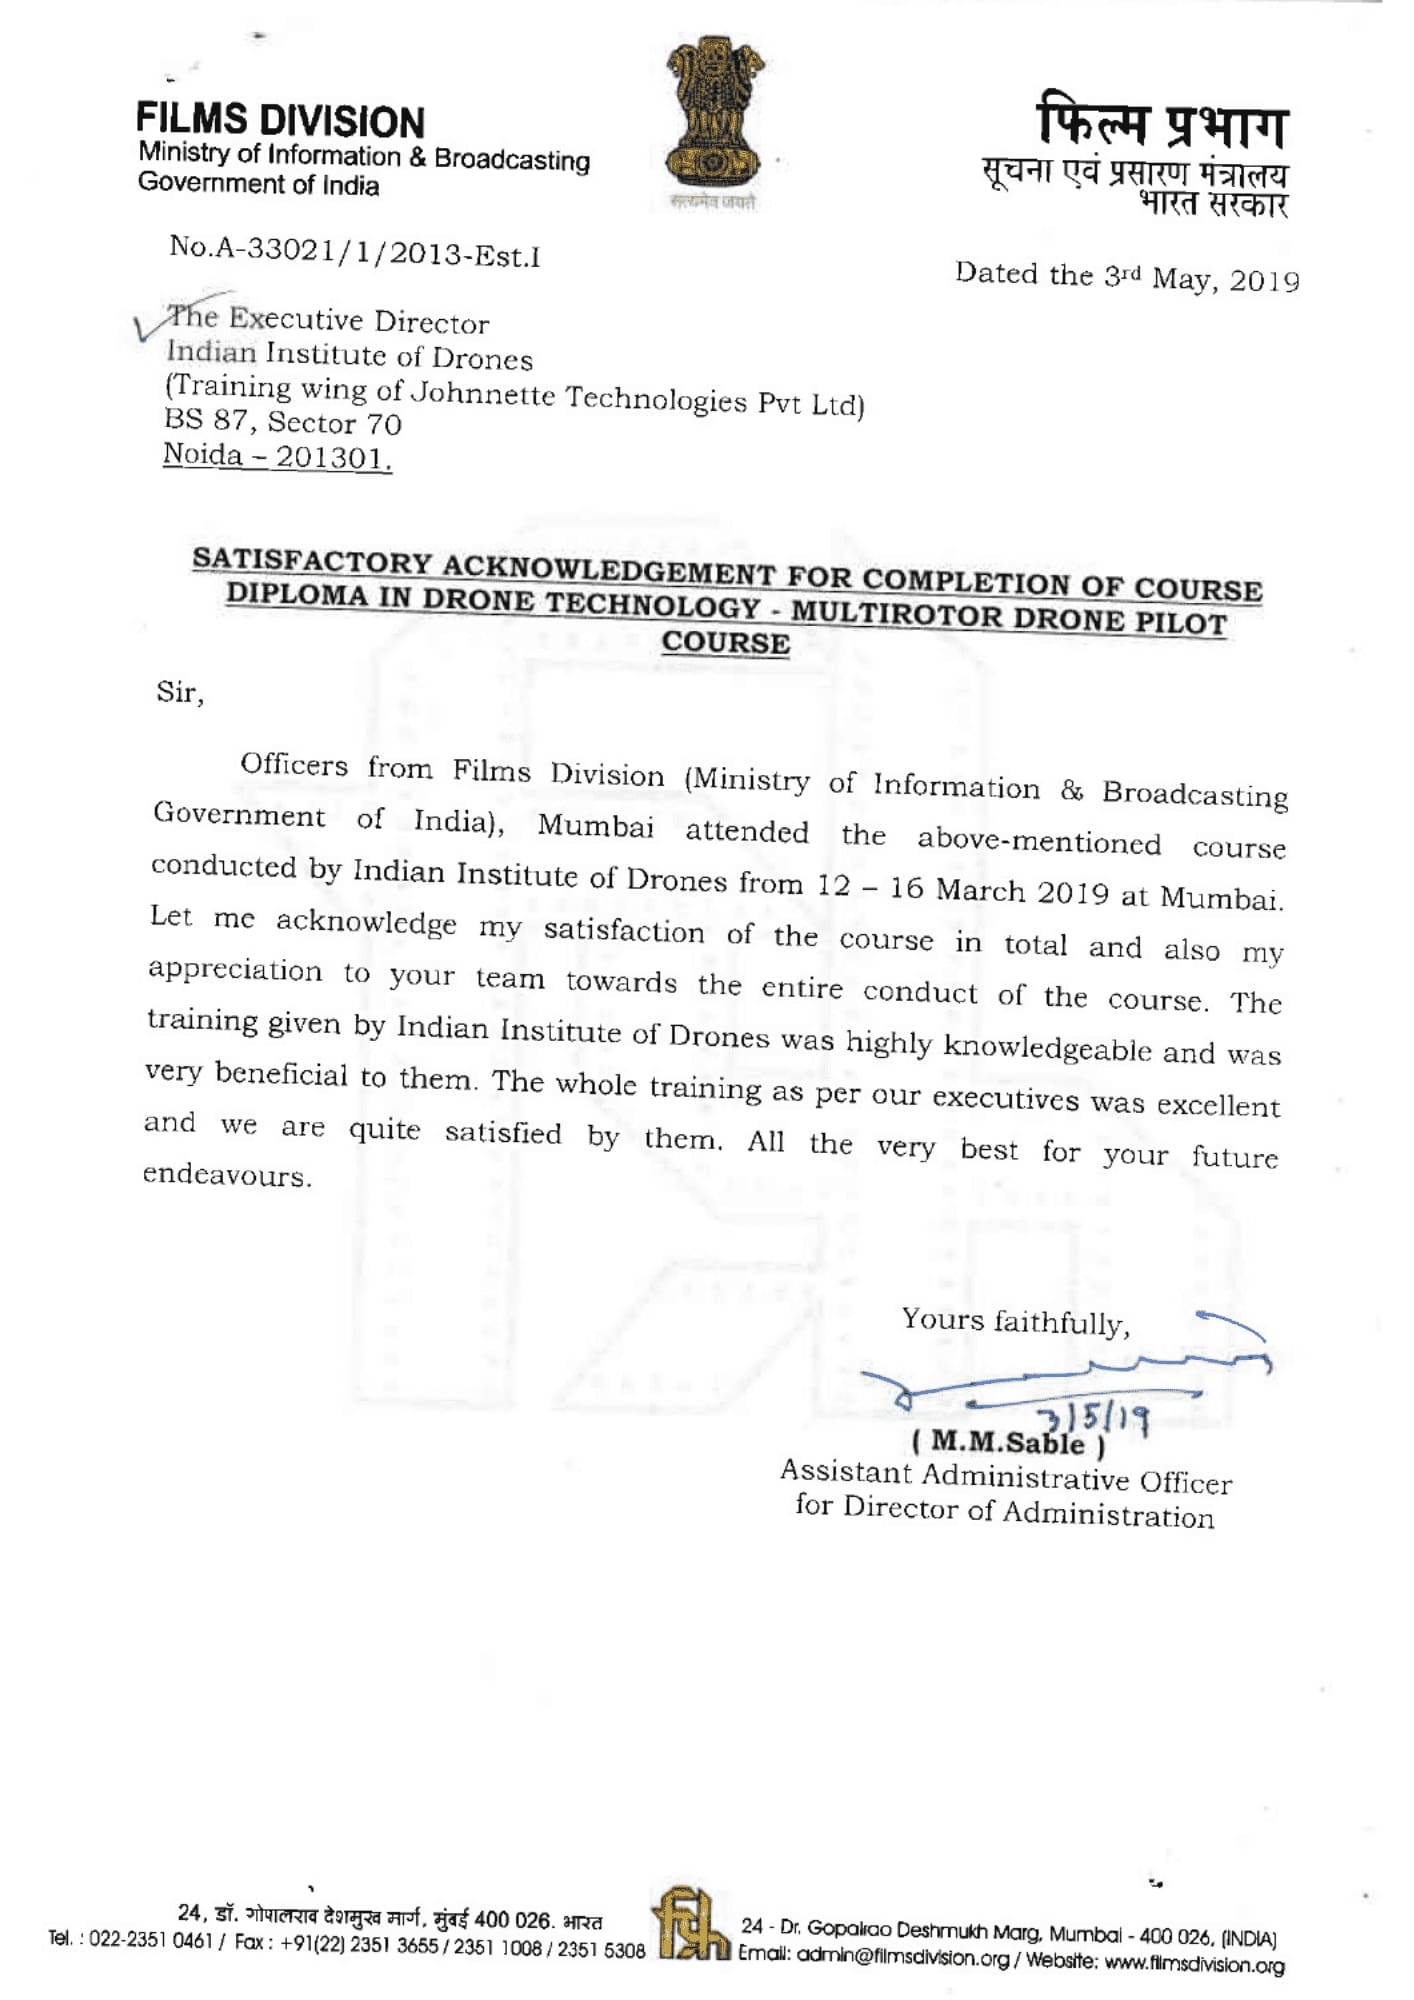 Satisfactory Letter from Ministry of Information and Broadcasting